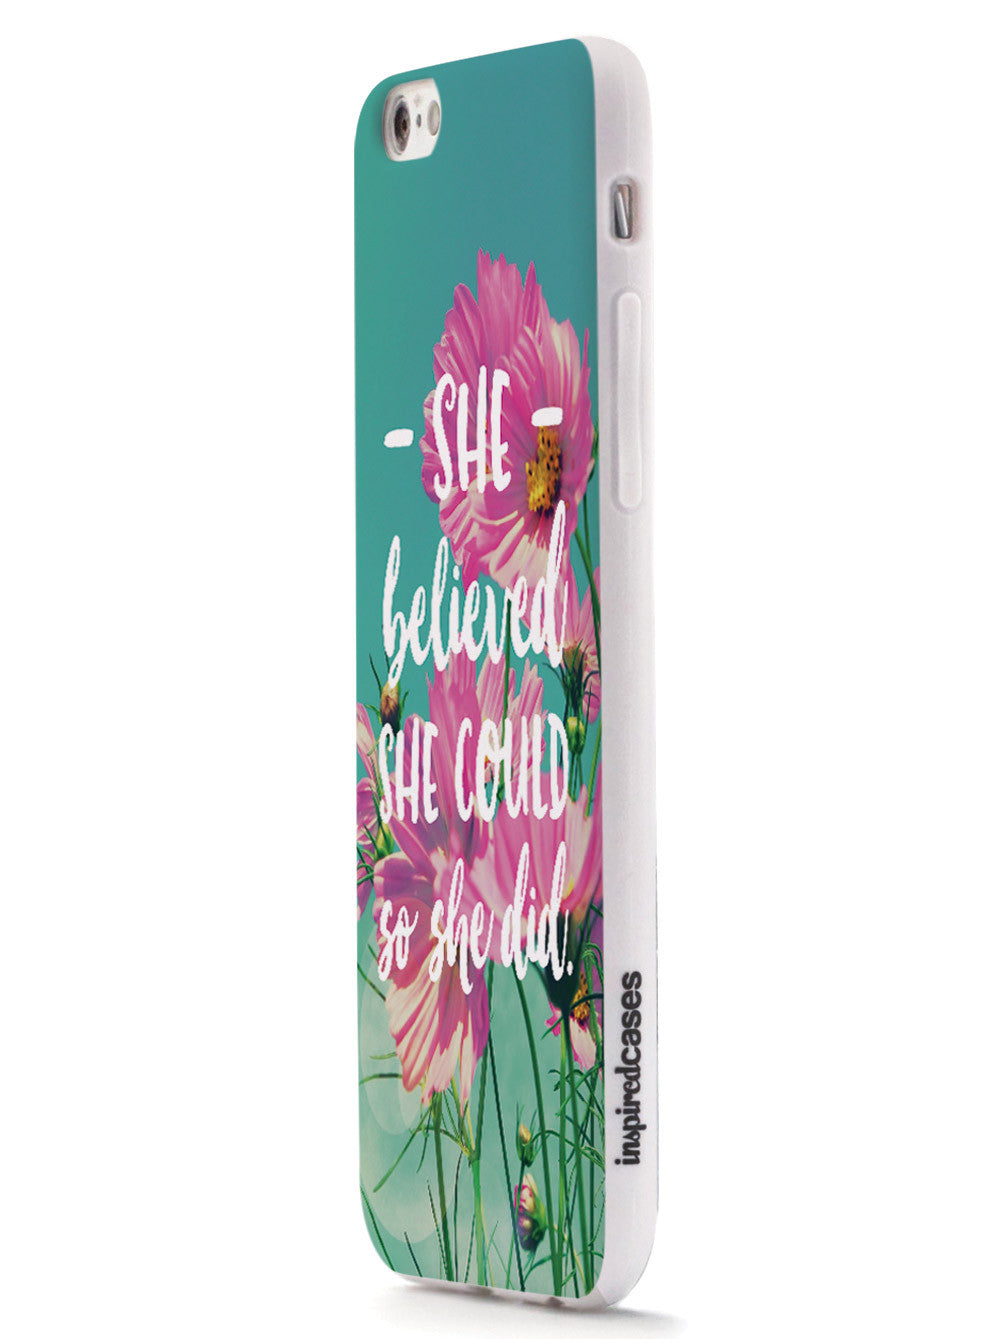 So She Did - Flower background Case